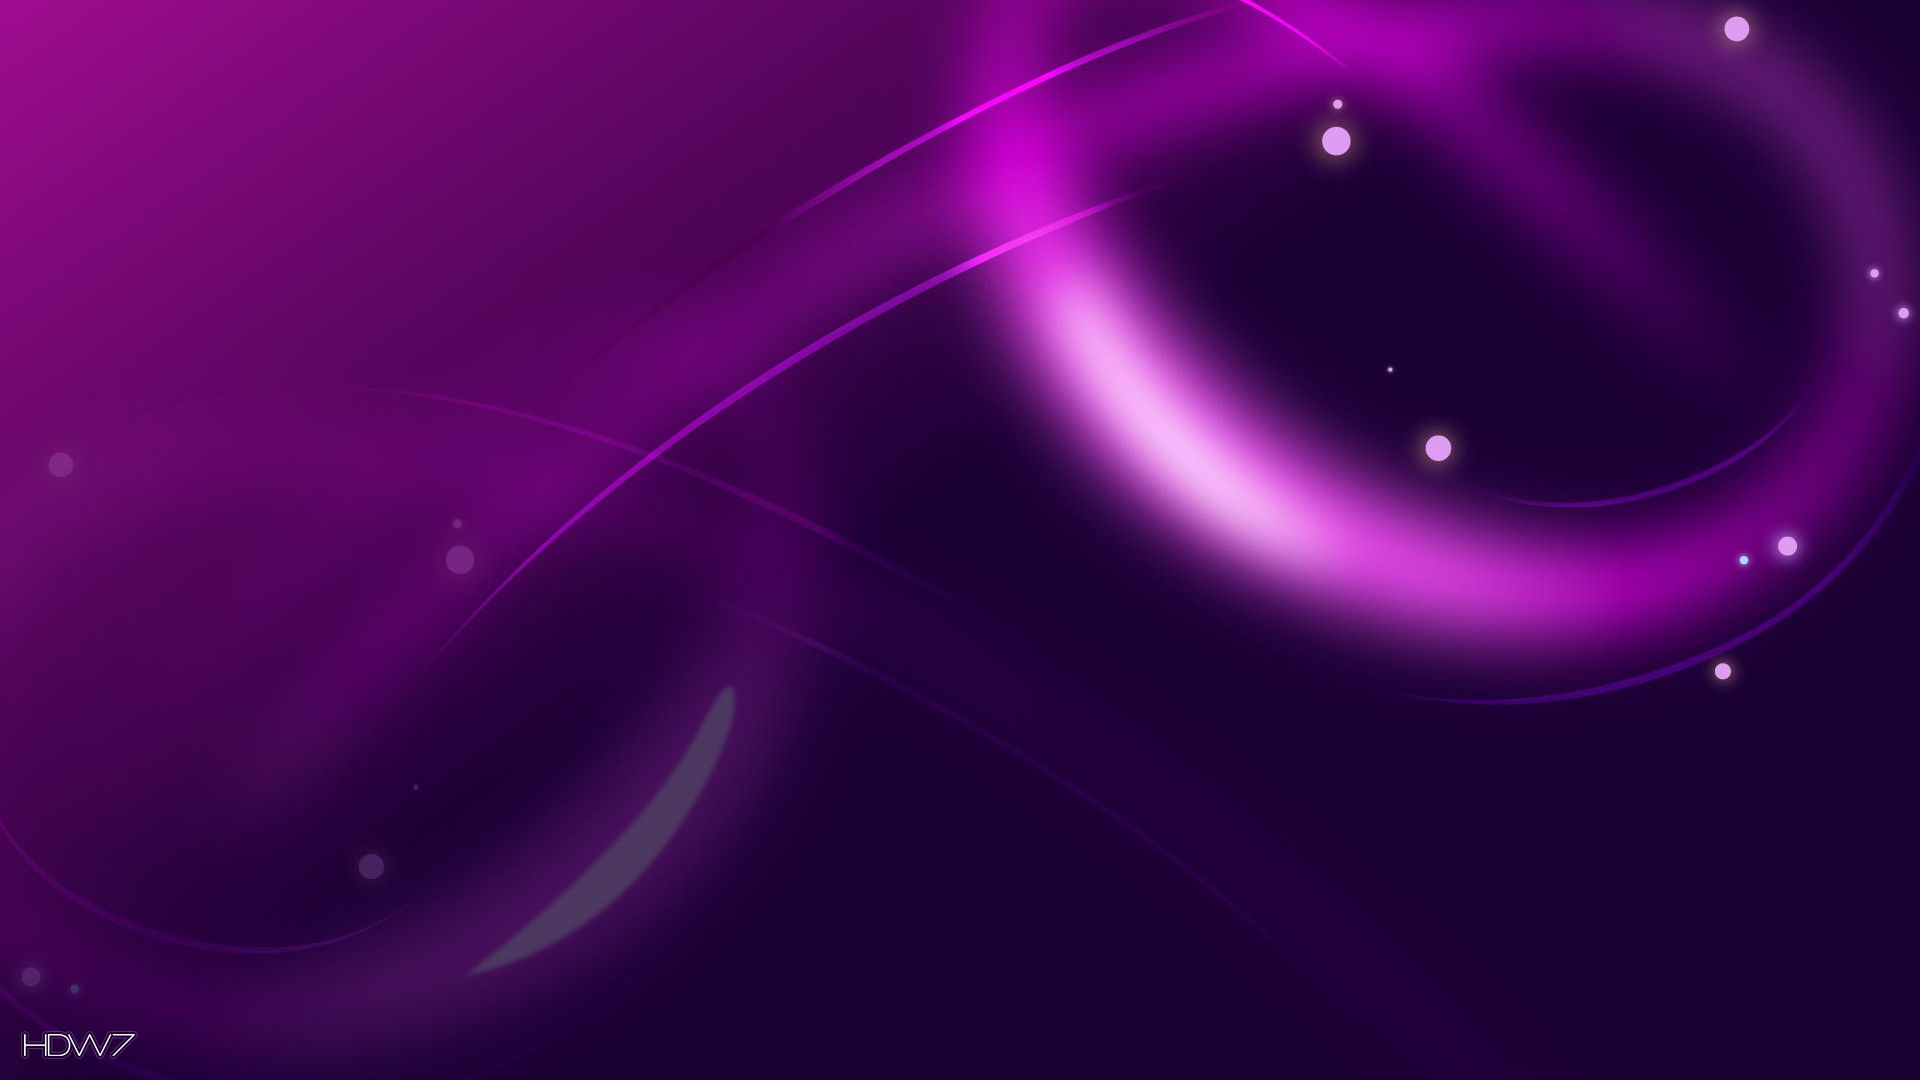  node lights background abstract 1080p HD WALLPAPERS GALLERY 158